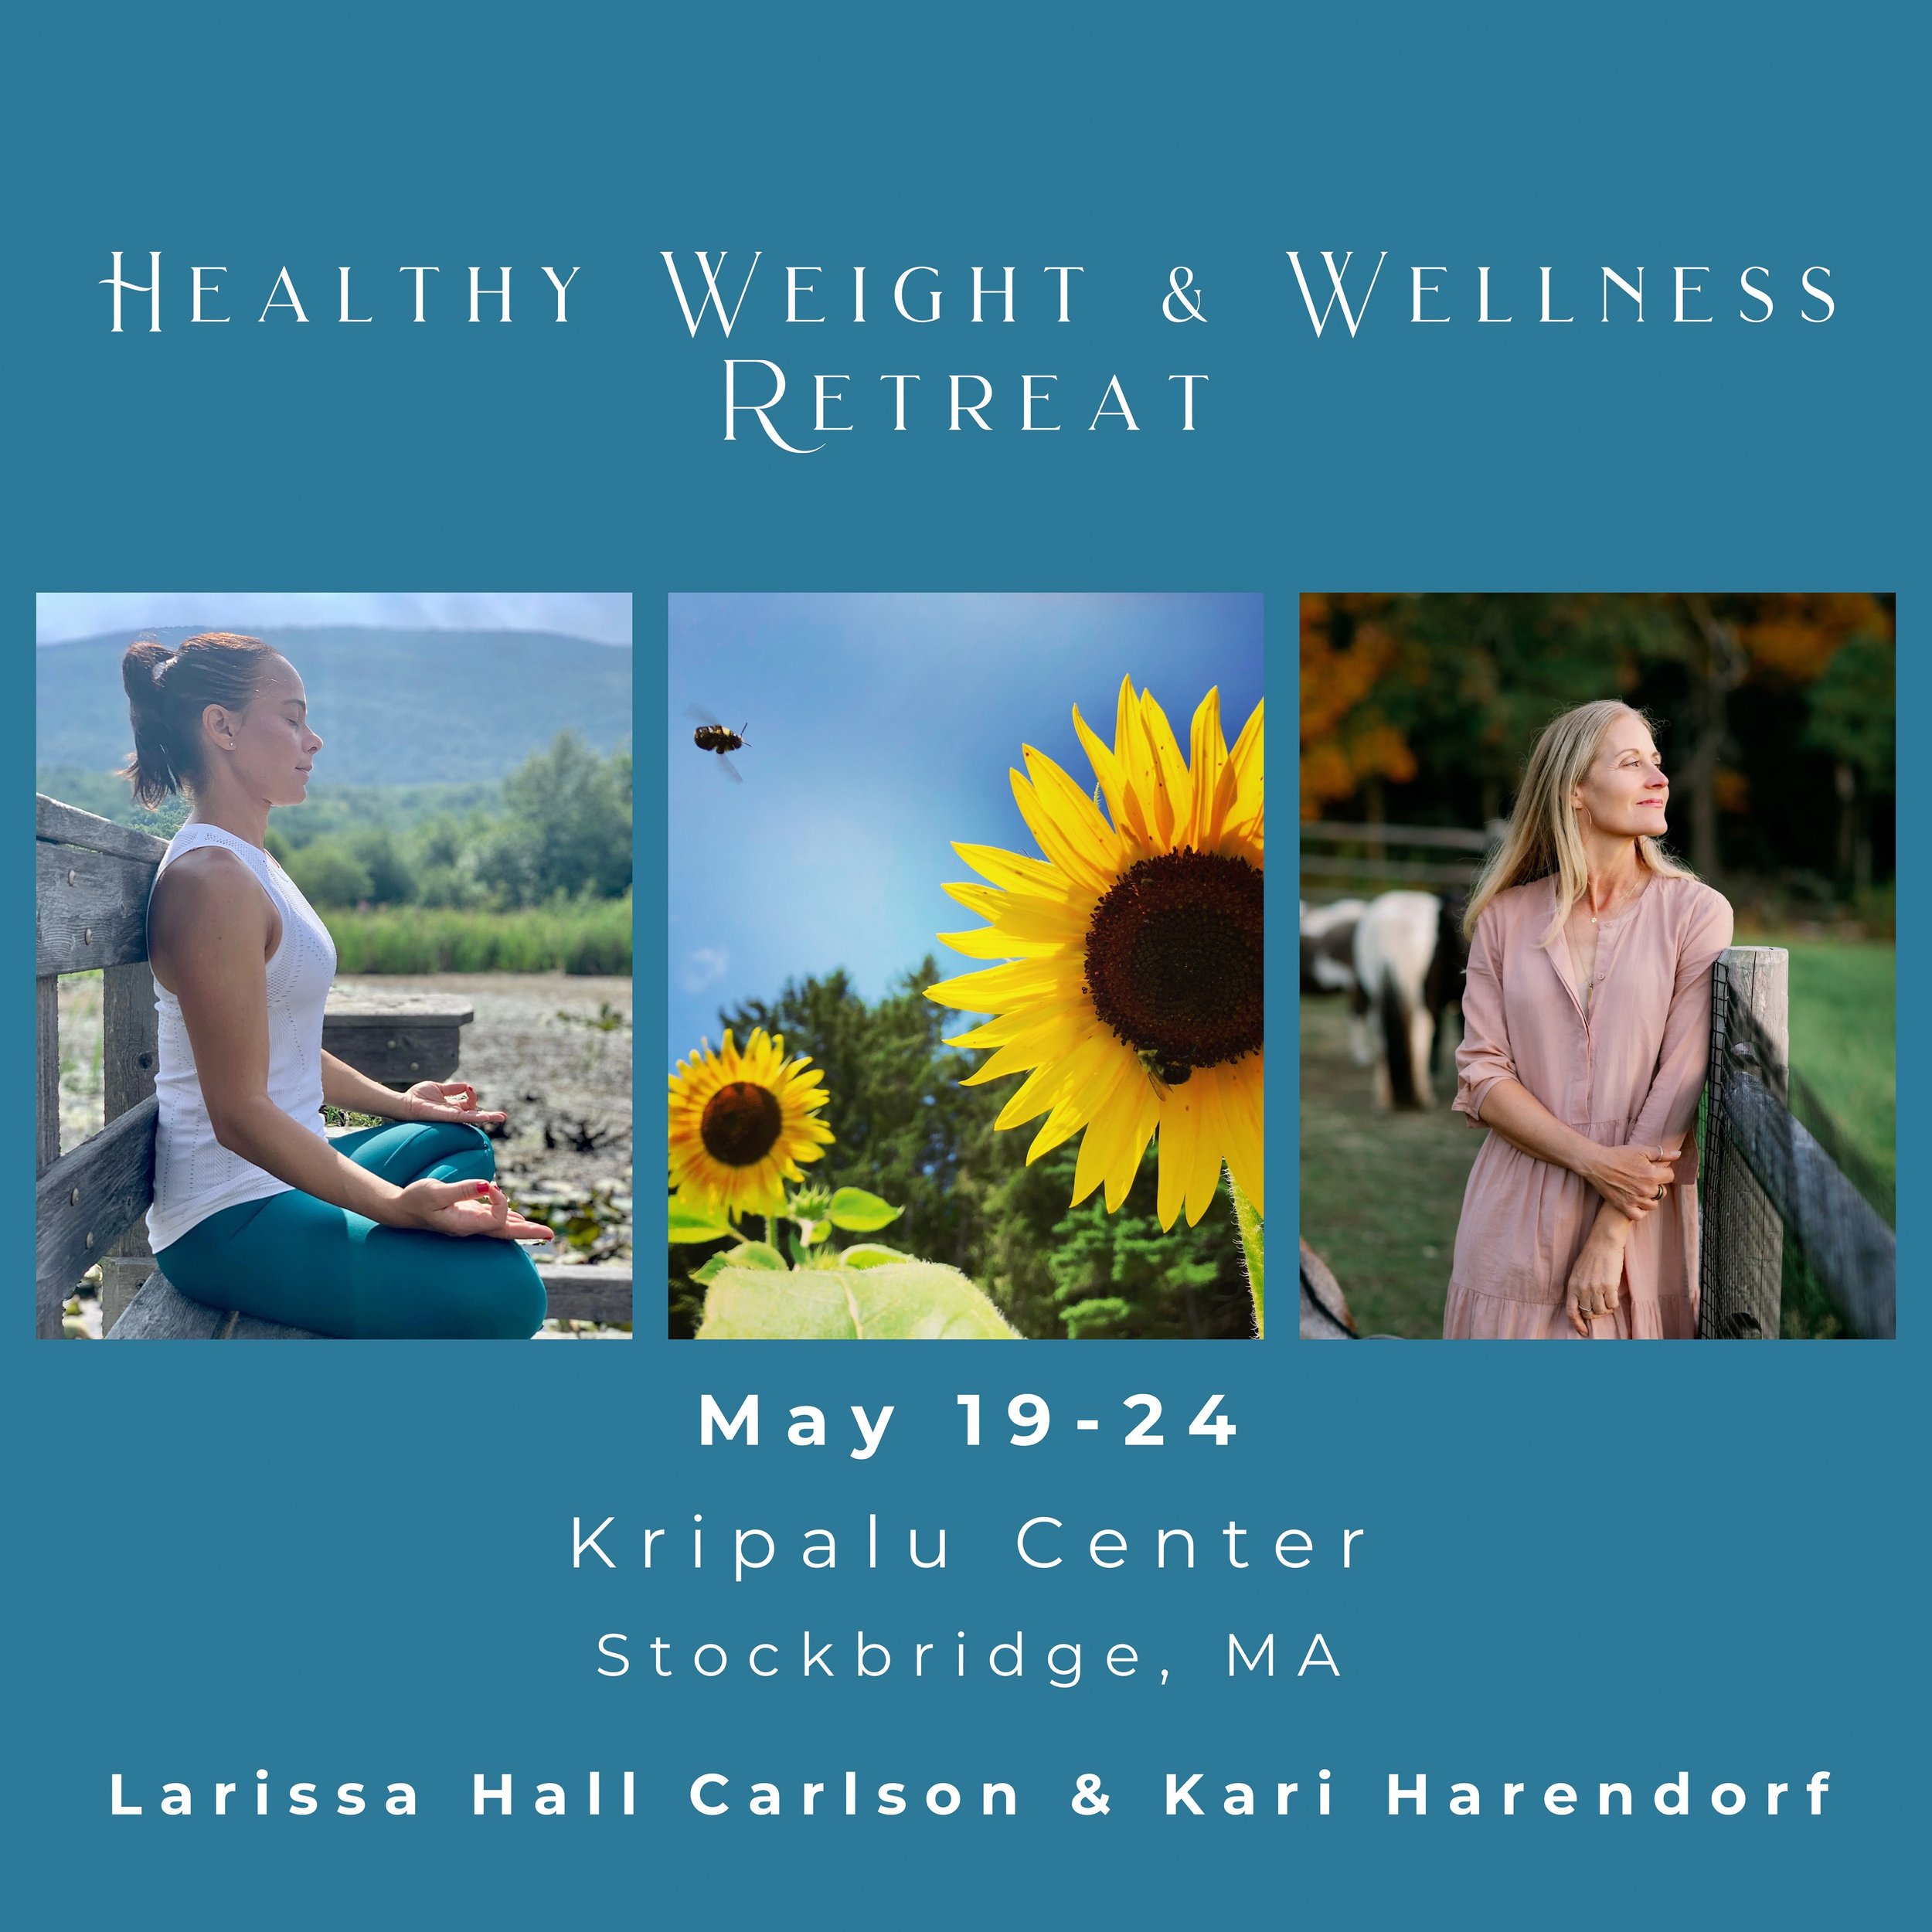 SET YOURSELF UP FOR A LIFETIME OF HEALTHY LIVING
Kripalu Center for Yoga &amp; Health
May 19-24

Join 20-year Kripalu Faculty member and former Dean of the Kripalu School of Ayurveda, Larissa Hall Carlson, and Ayurvedic Health Counselor and yoga ther